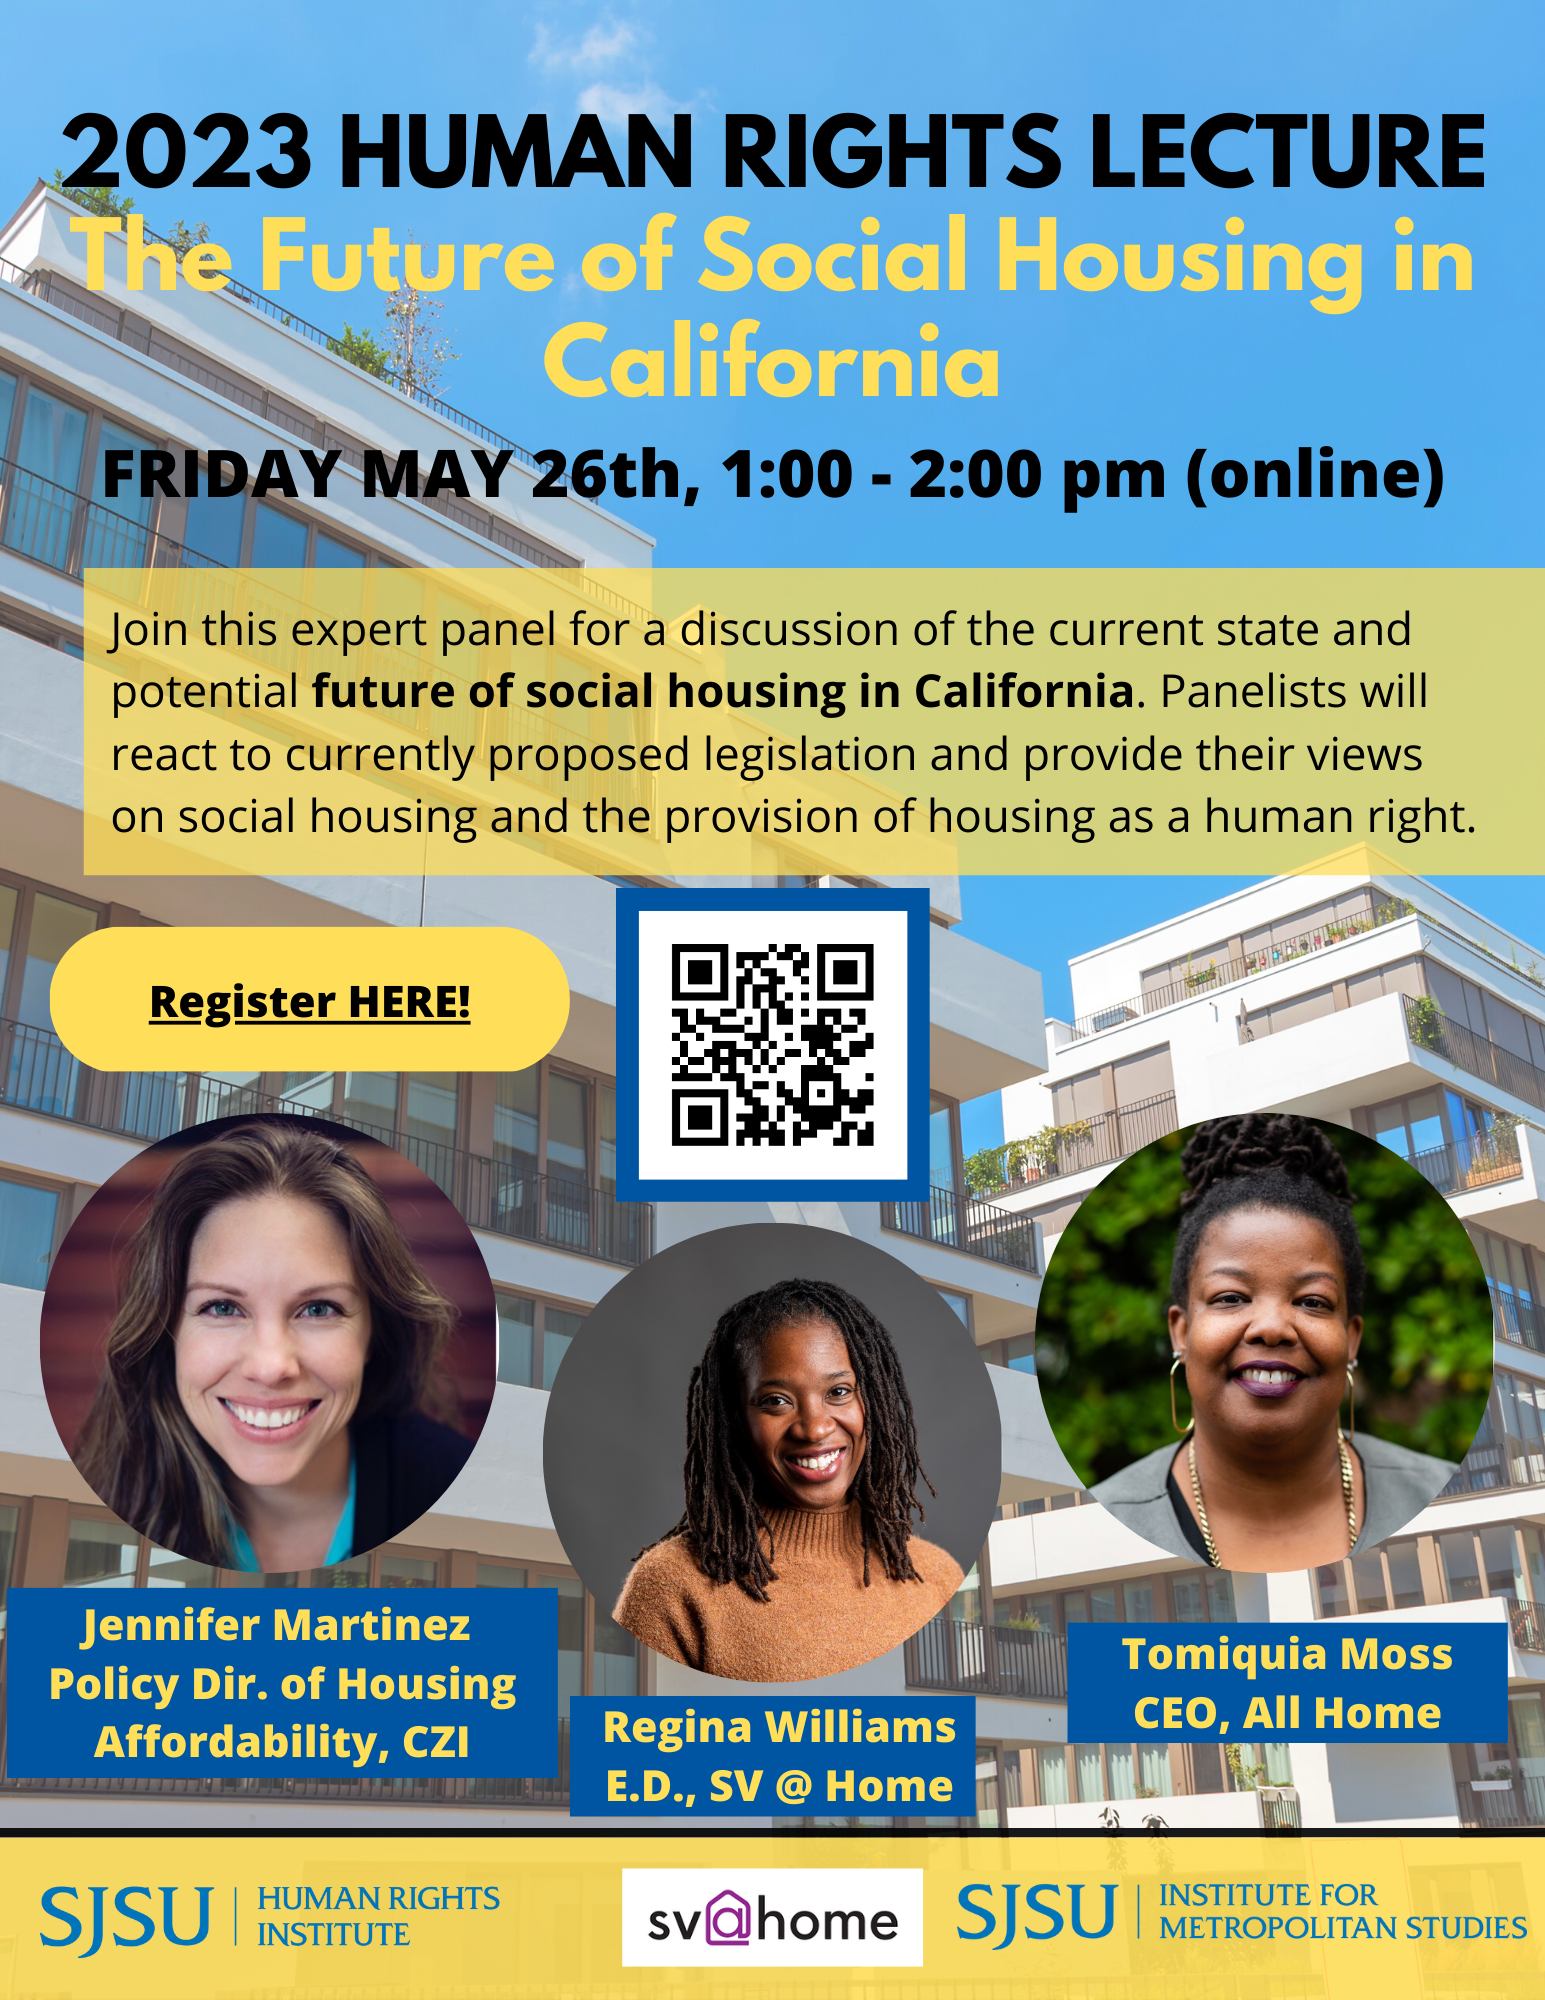 The Future of Social Housing in California